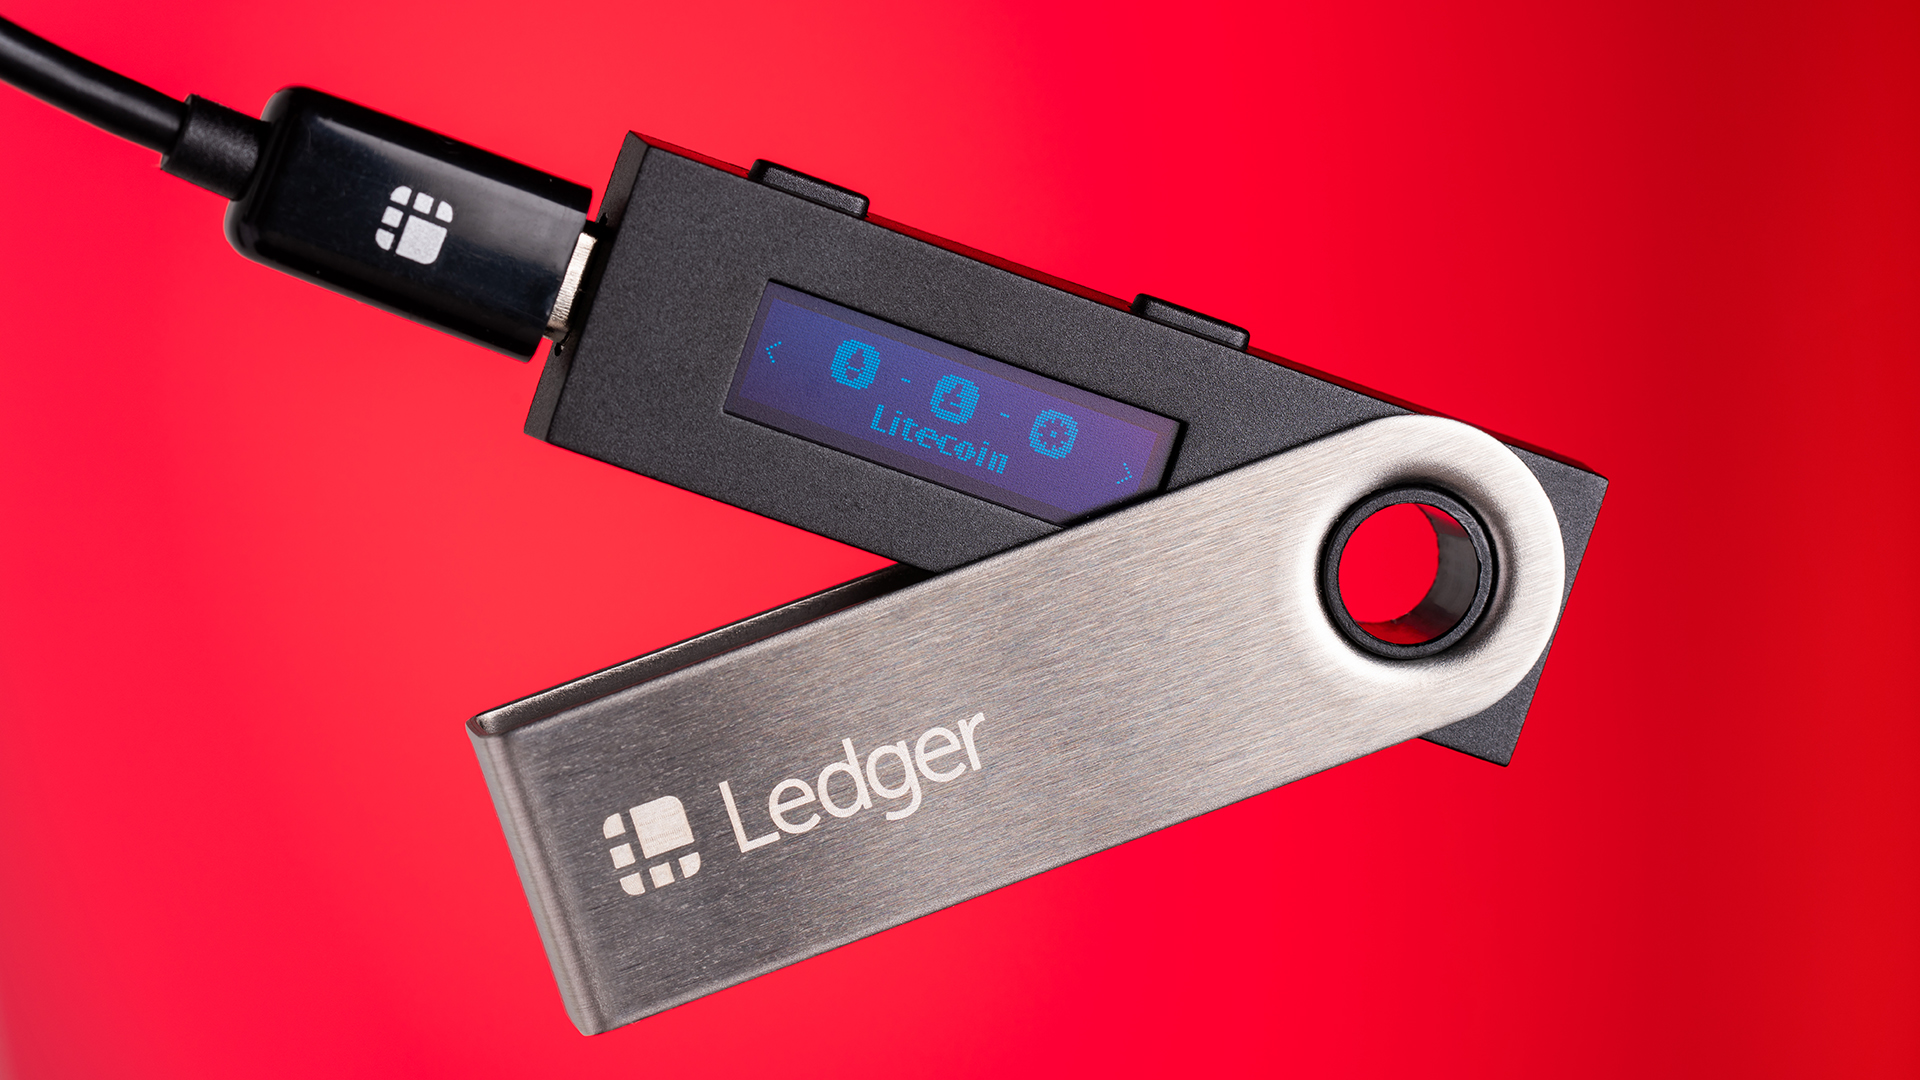 How to Put Crypto on a USB